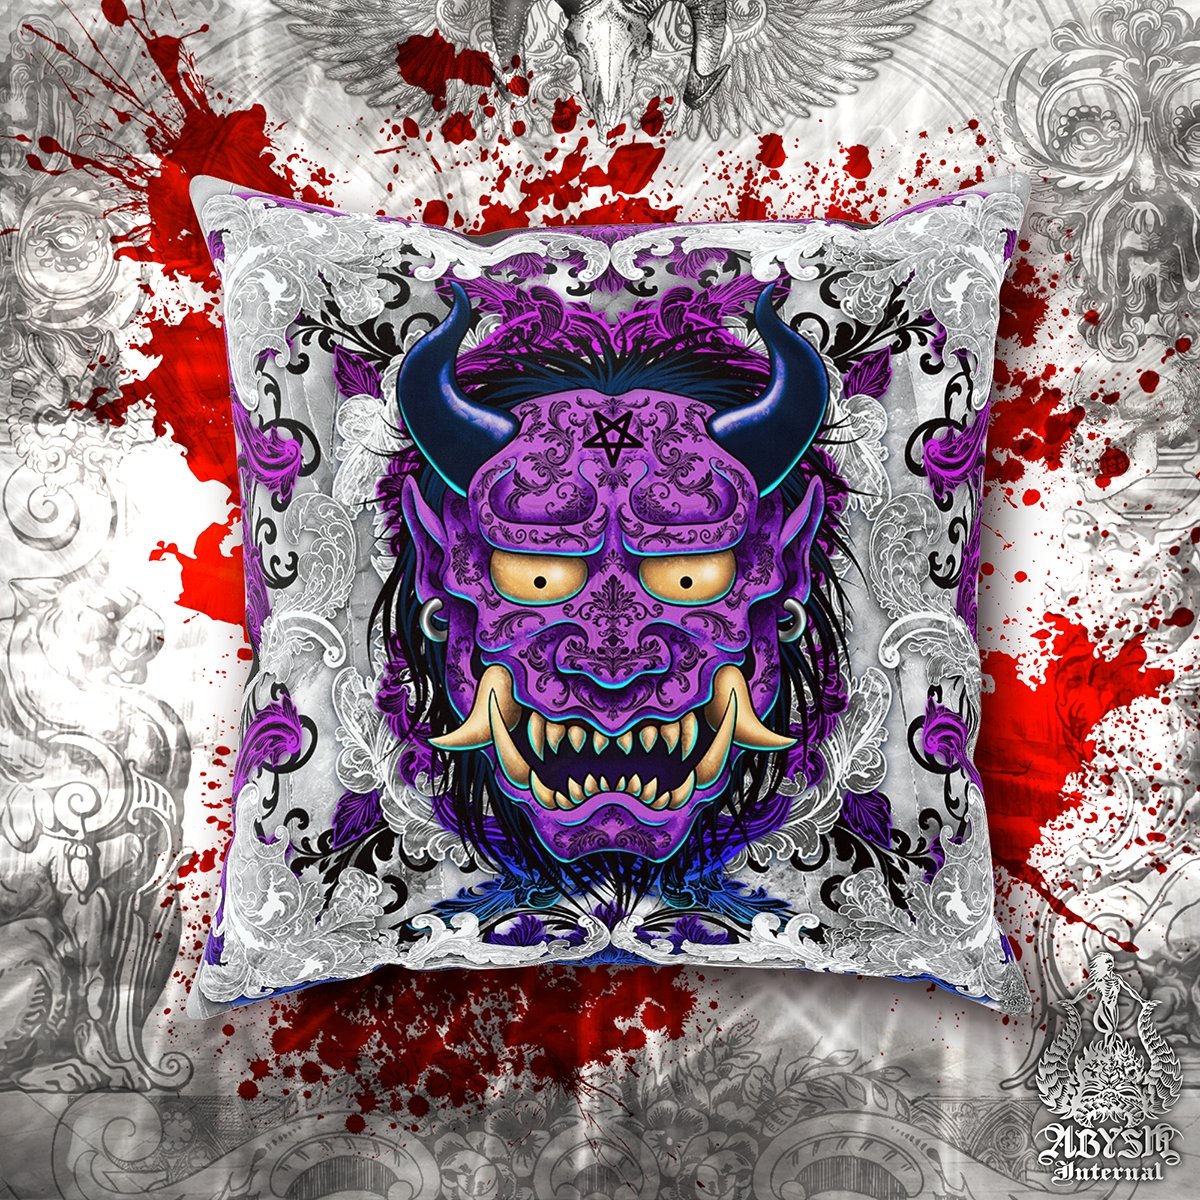 Japanese Demon Throw Pillow, Decorative Accent Cushion, Anime and Gamer Room Decor, Alternative Home - Pastel and White Goth Oni or Hannya - Abysm Internal